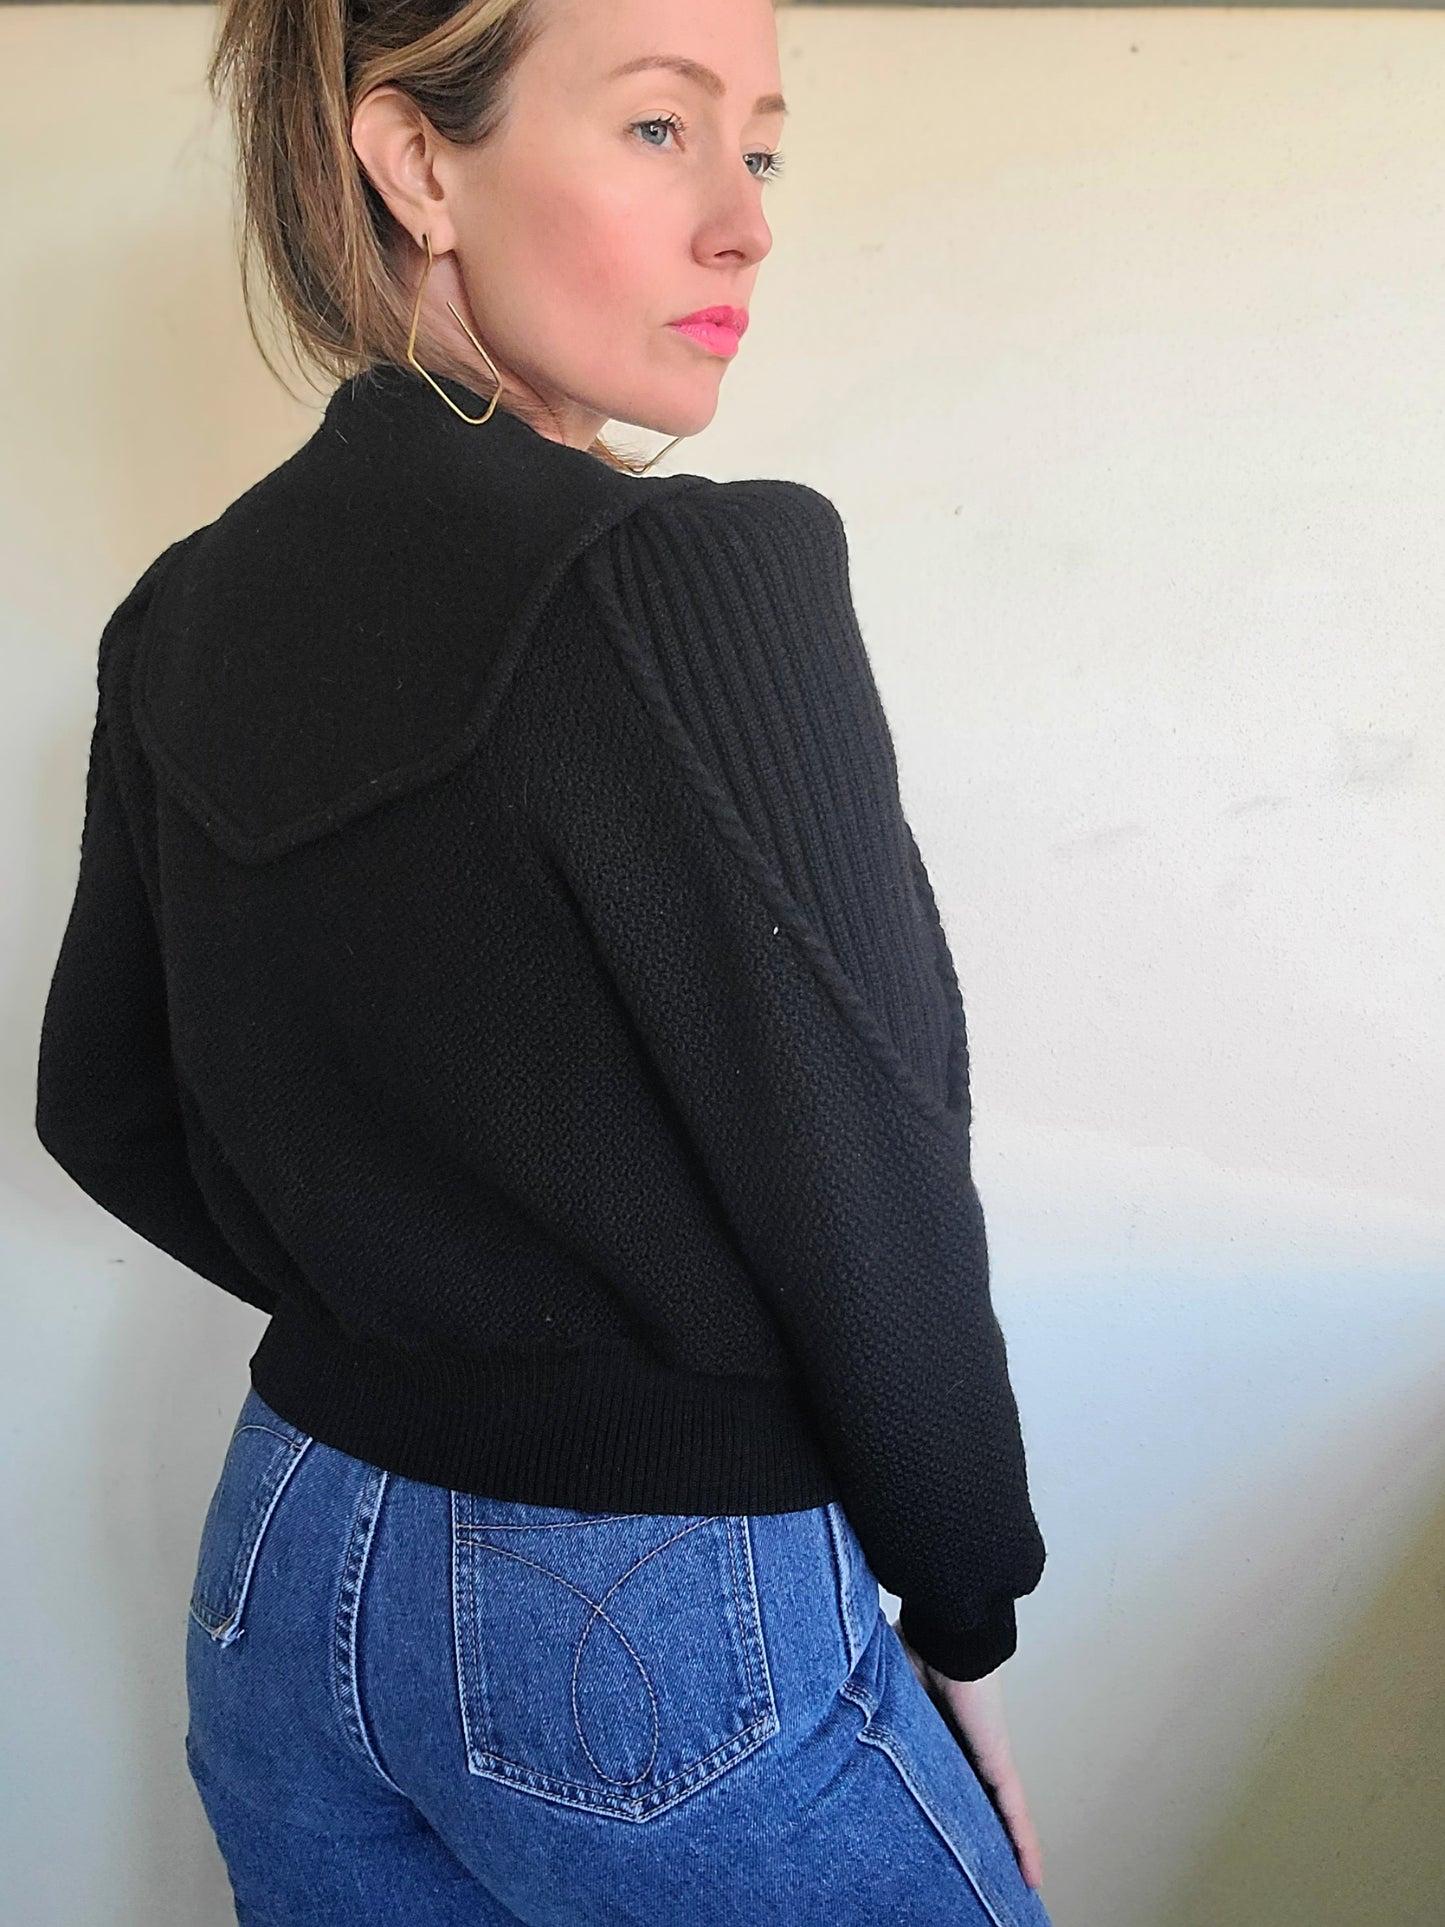 The Black Like My Heart Wool Cardigan Sweater by Geiger S-M